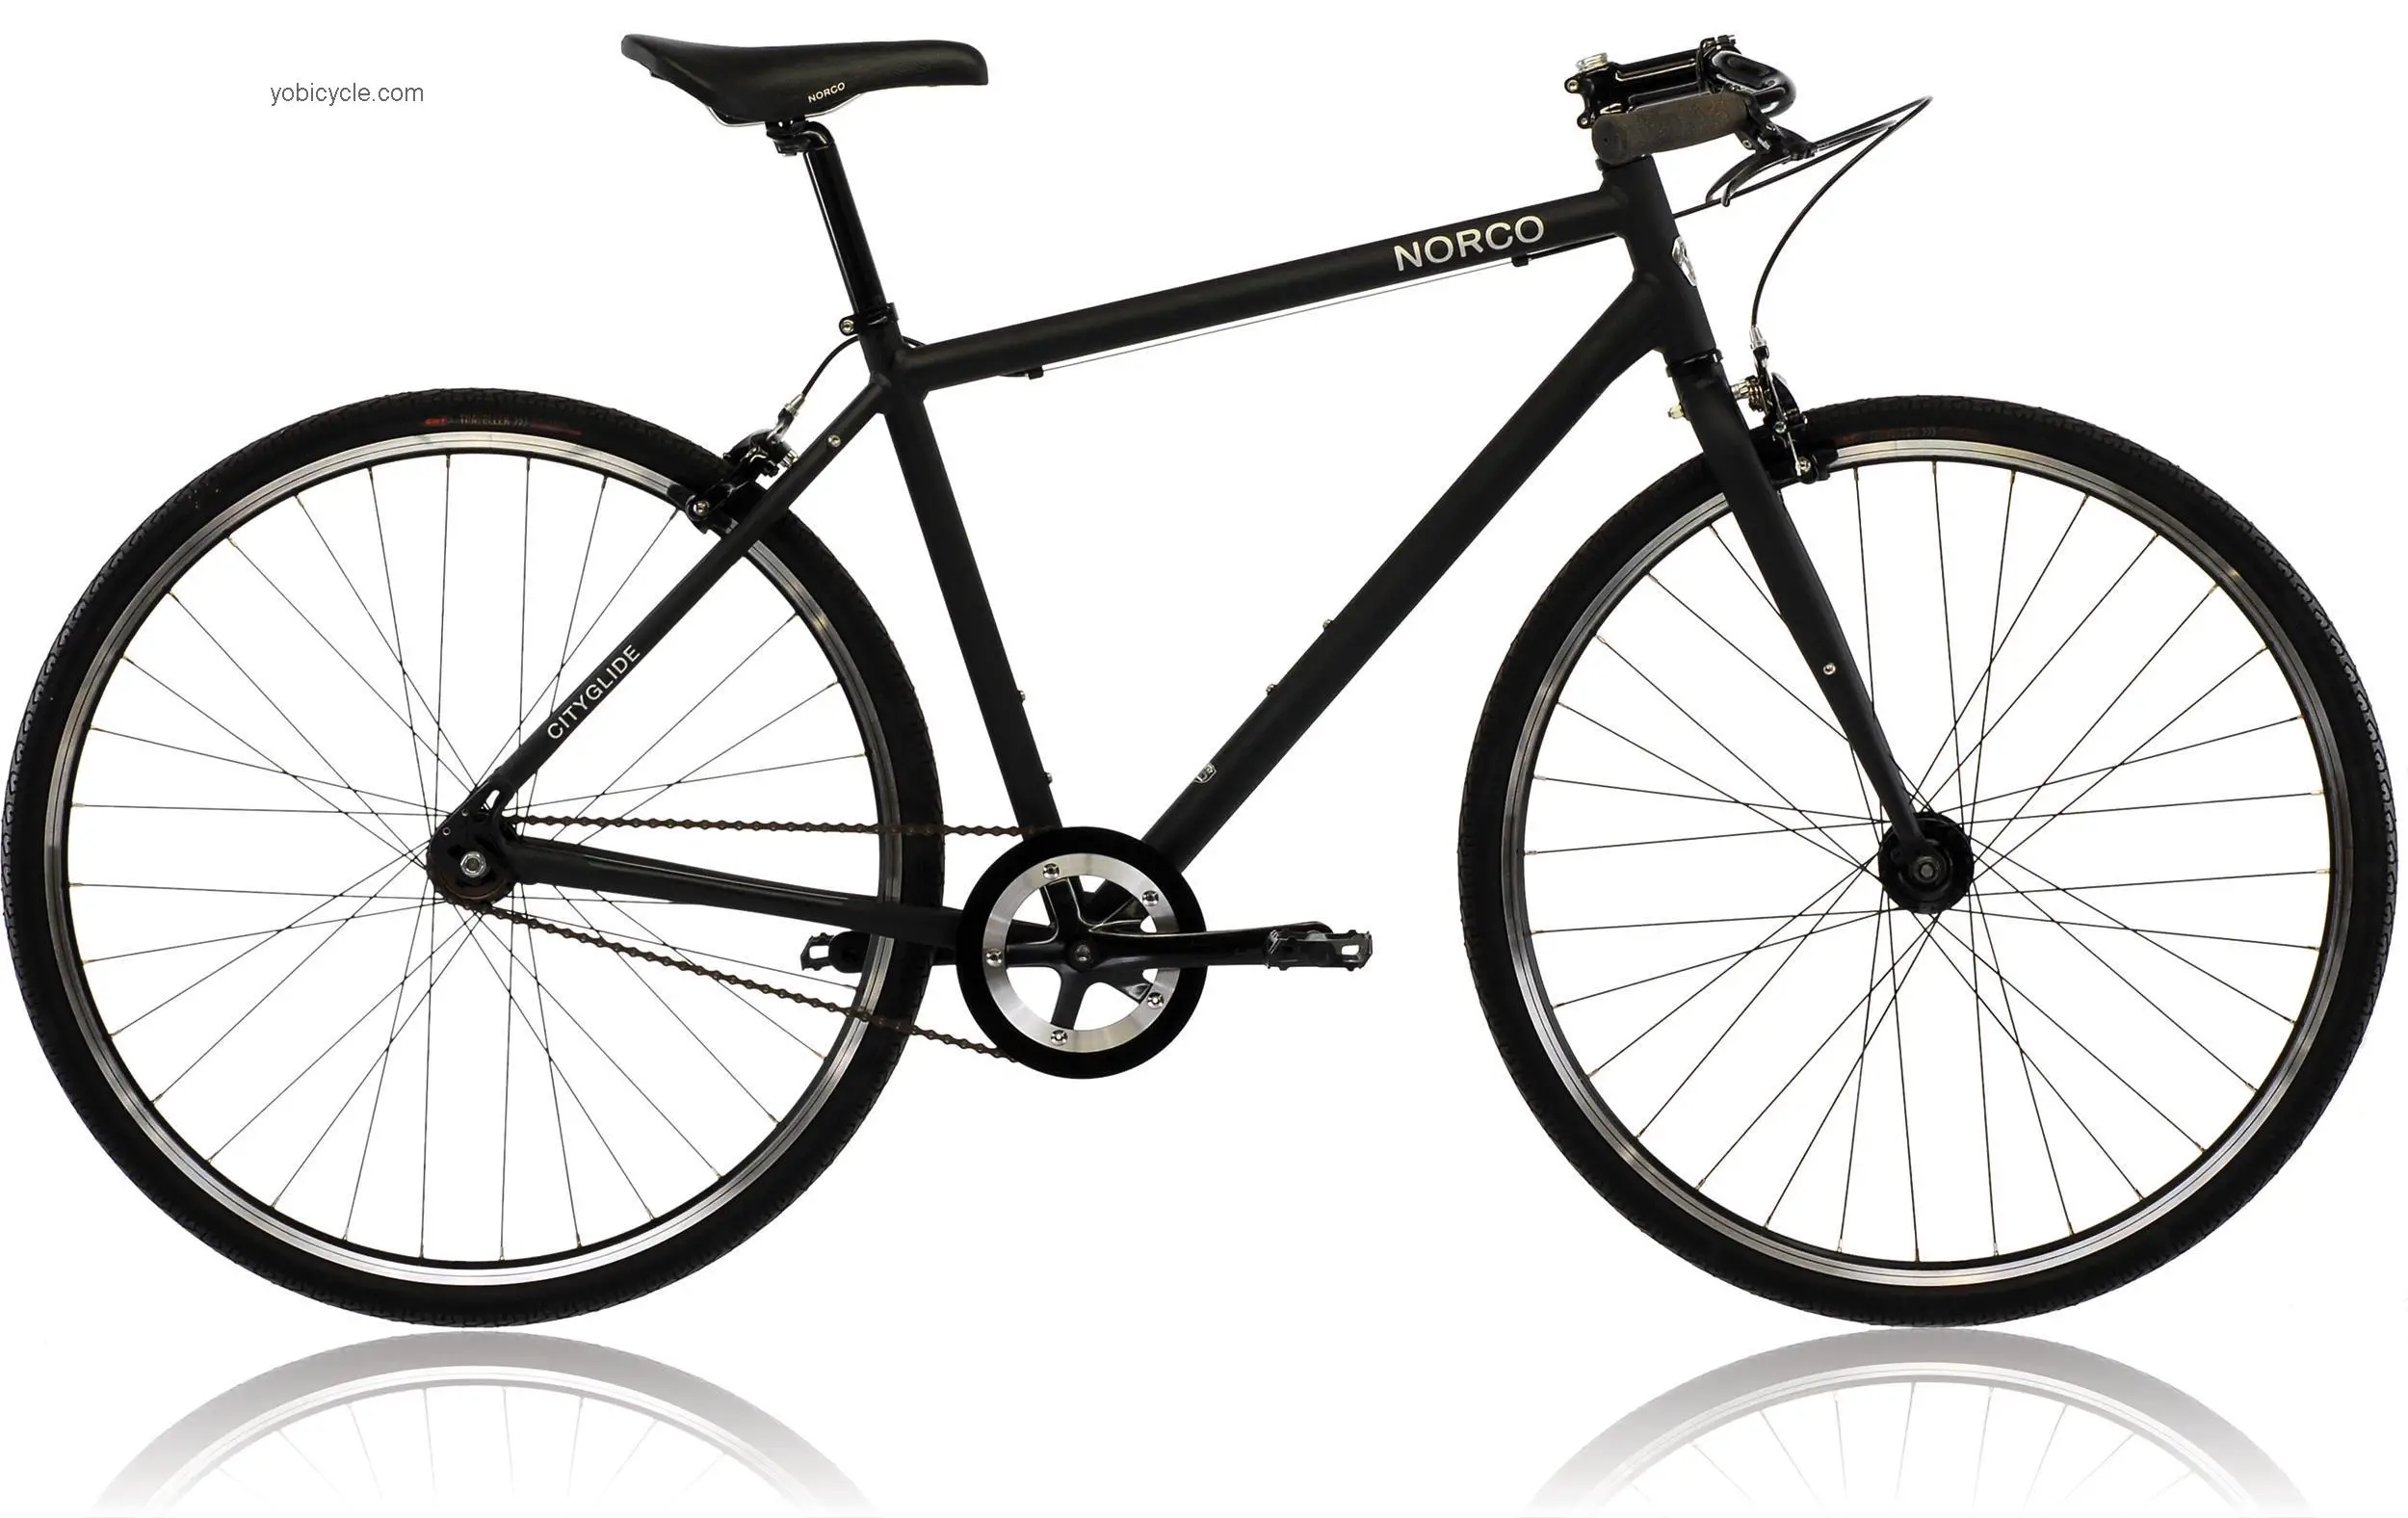 Norco City Glide SS 2013 comparison online with competitors